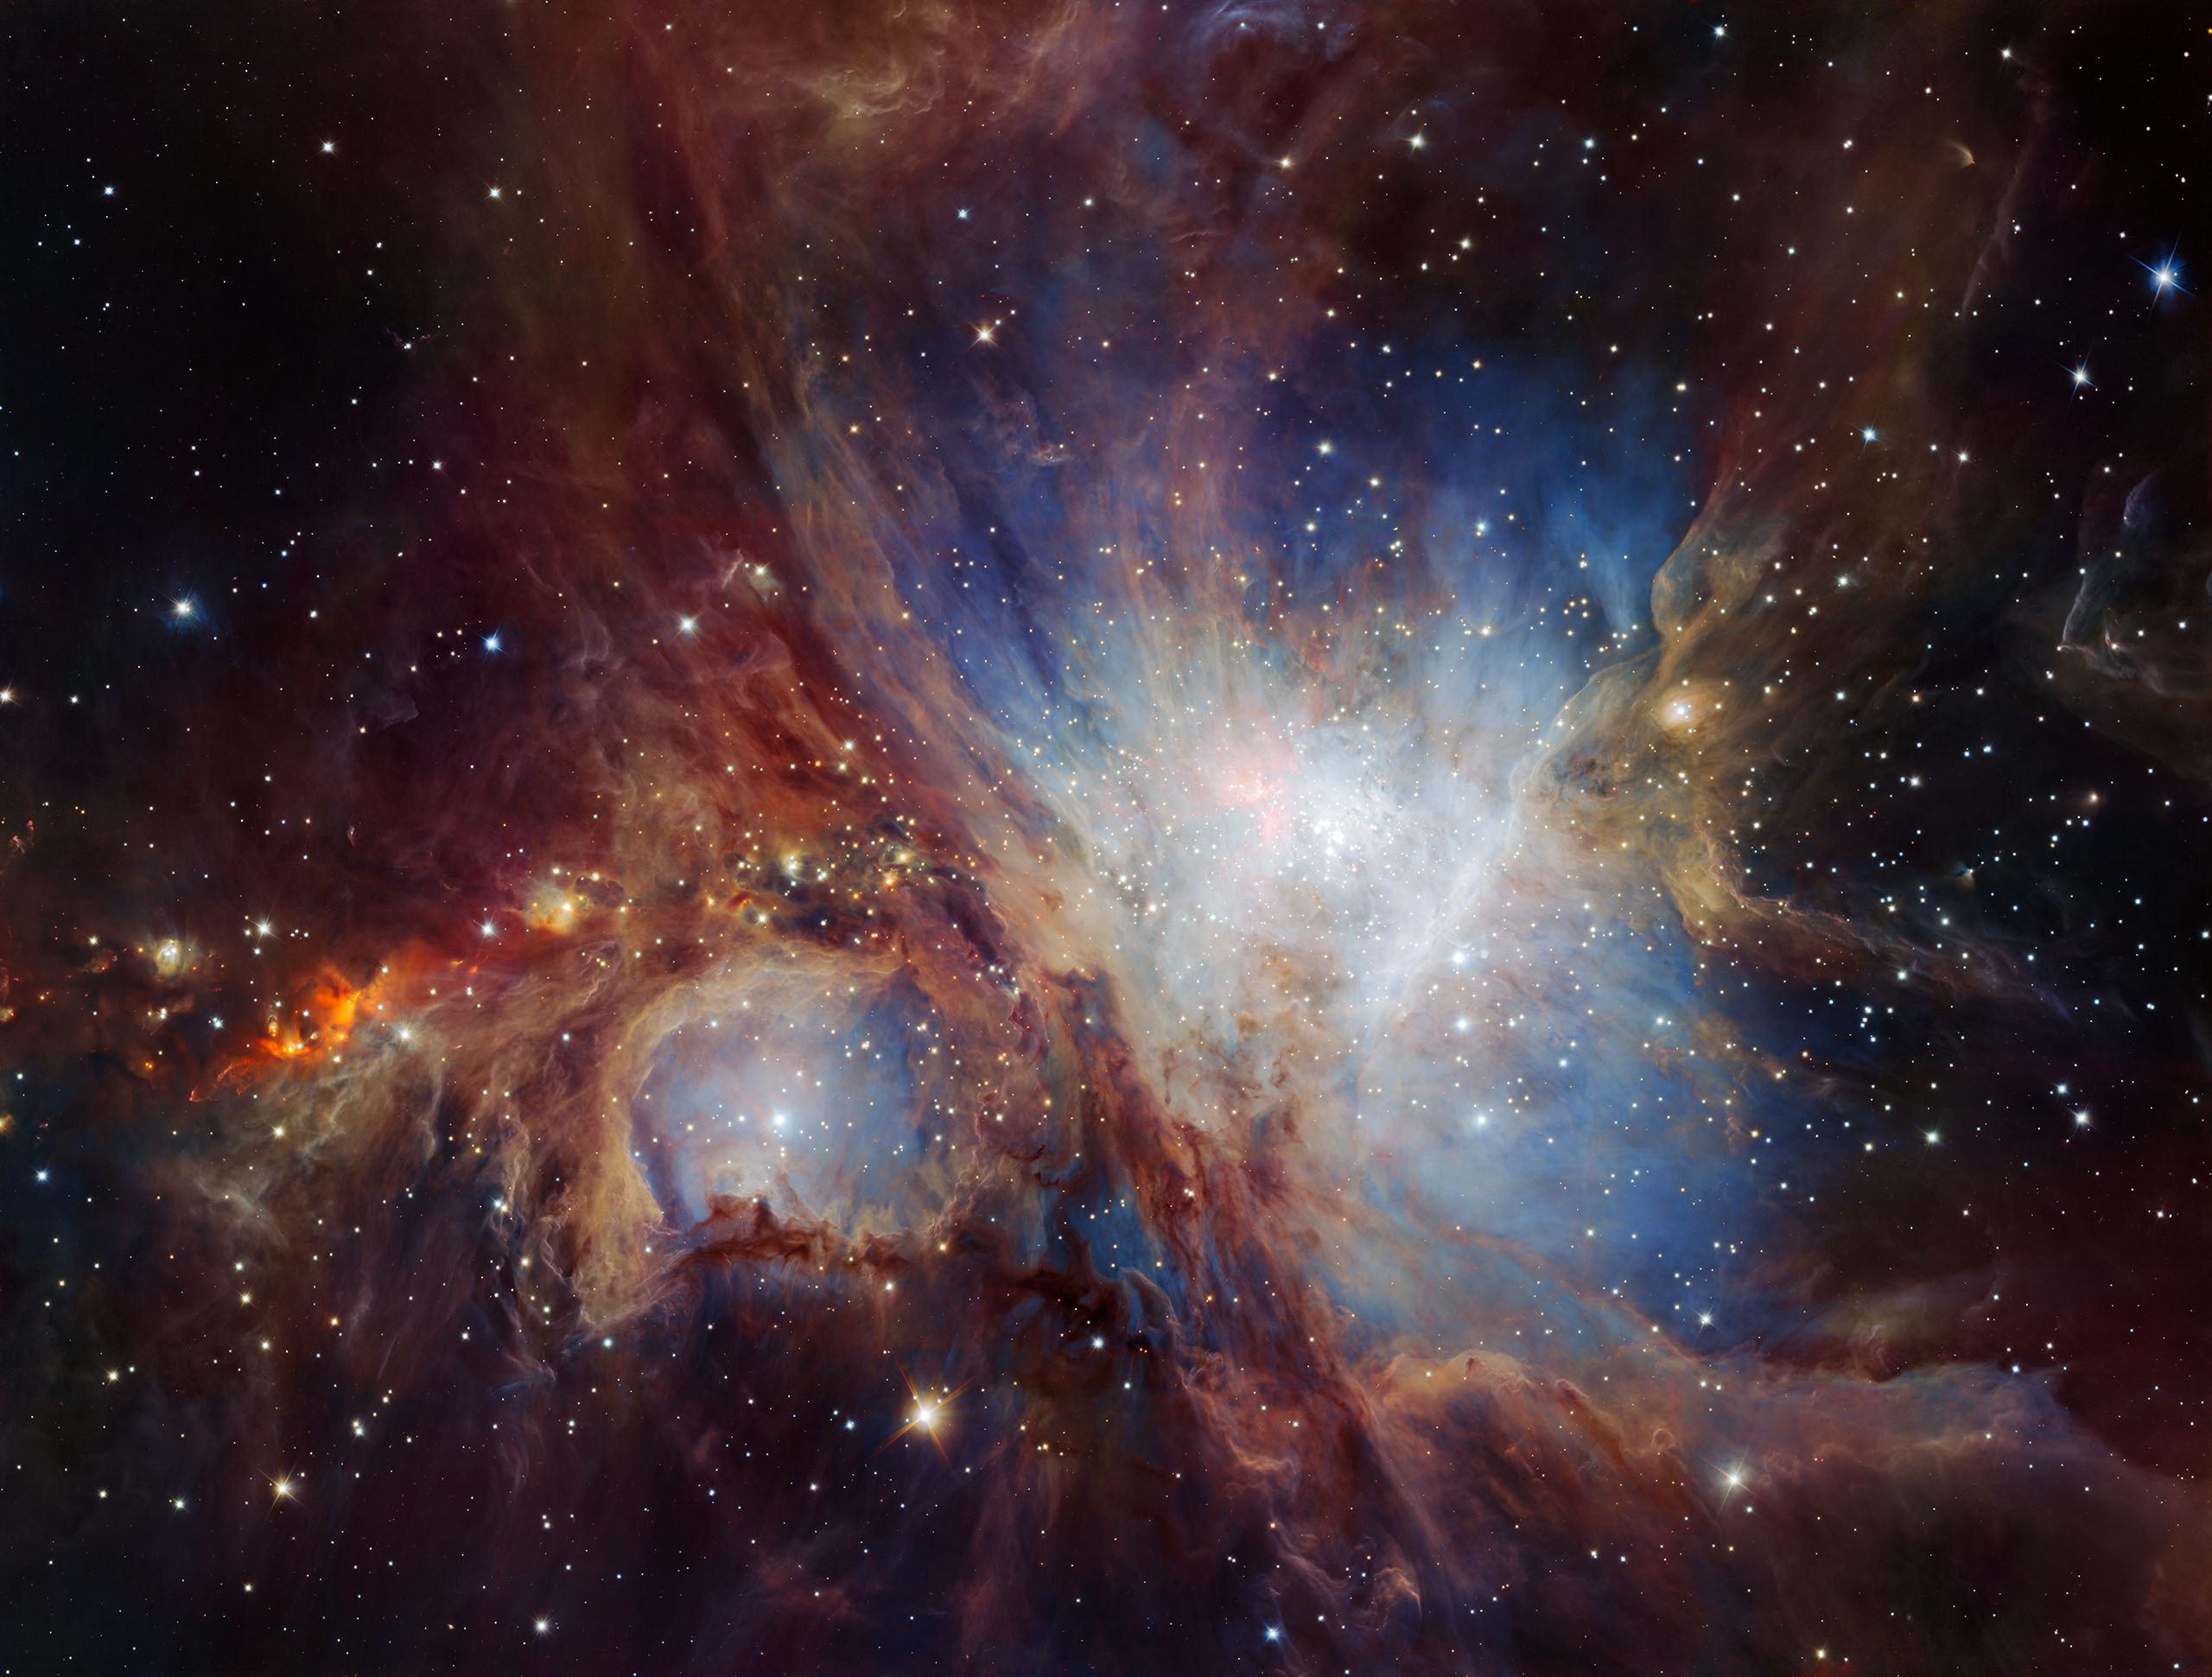 This image of the Orion Nebula star-formation region was obtained from multiple exposures using the HAWK-I infrared camera on ESO’s Very Large Telescope in Chile. (ESO/H. Drass et al.)